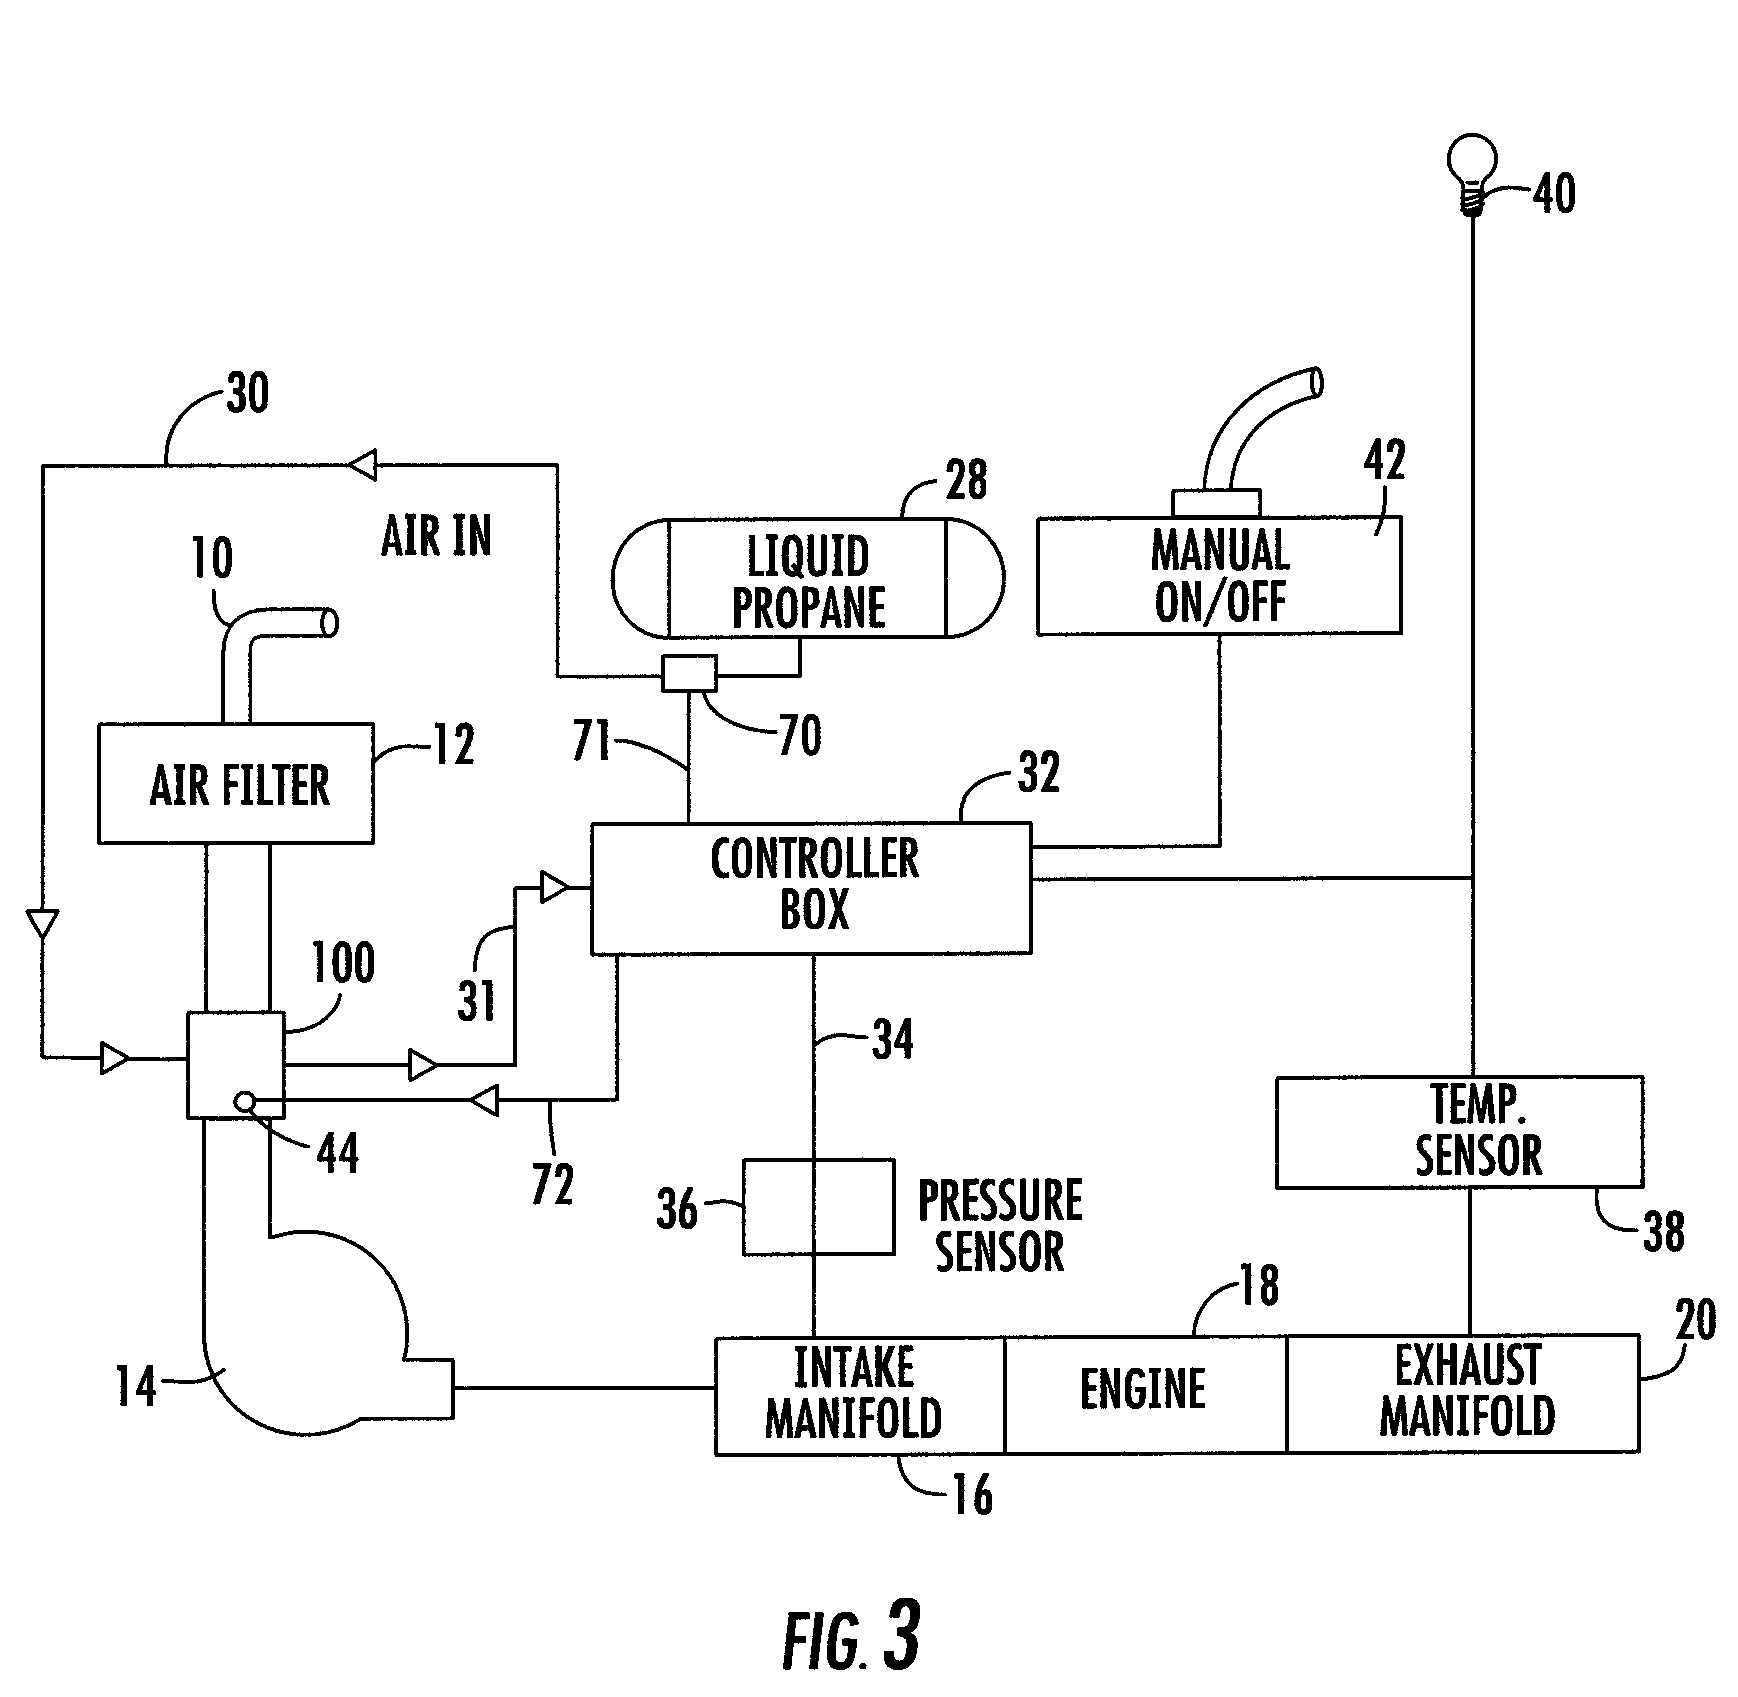 Super cooled air and fuel induction system for internal combustion engines